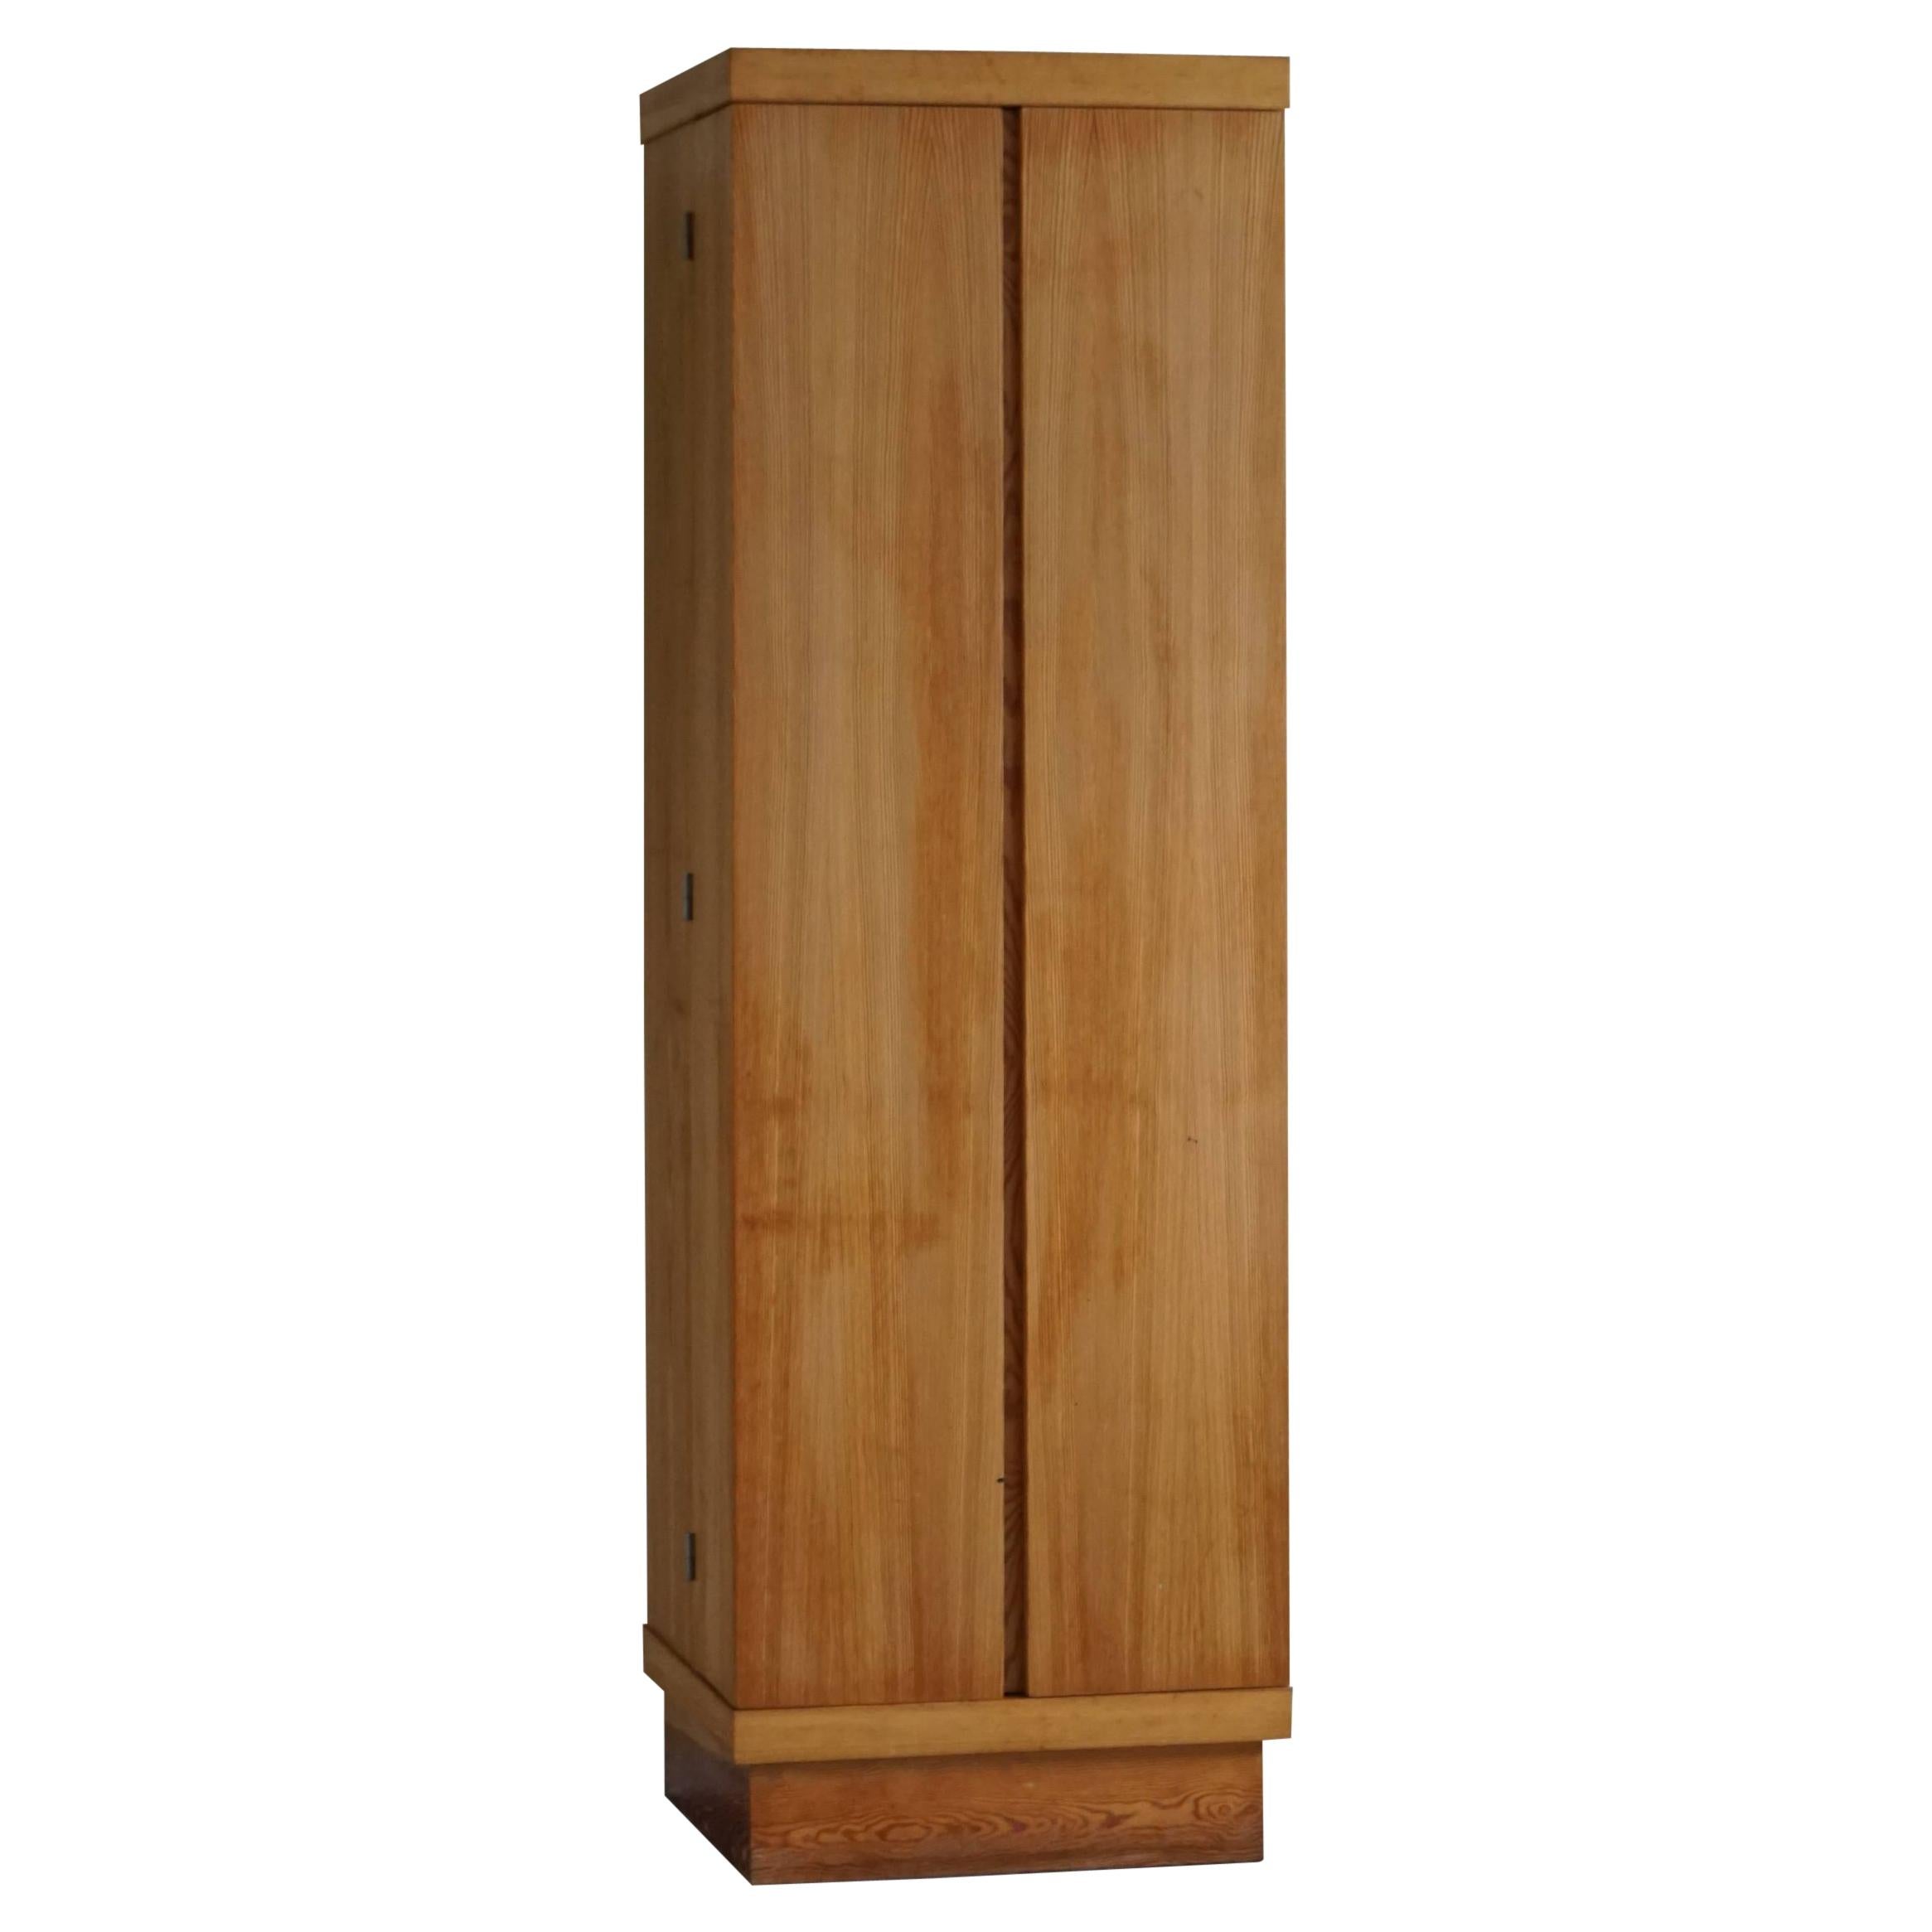 Mid Century Cubist Shoe Cabinet in Pine, Made by a Danish Cabinetmaker, 1980s